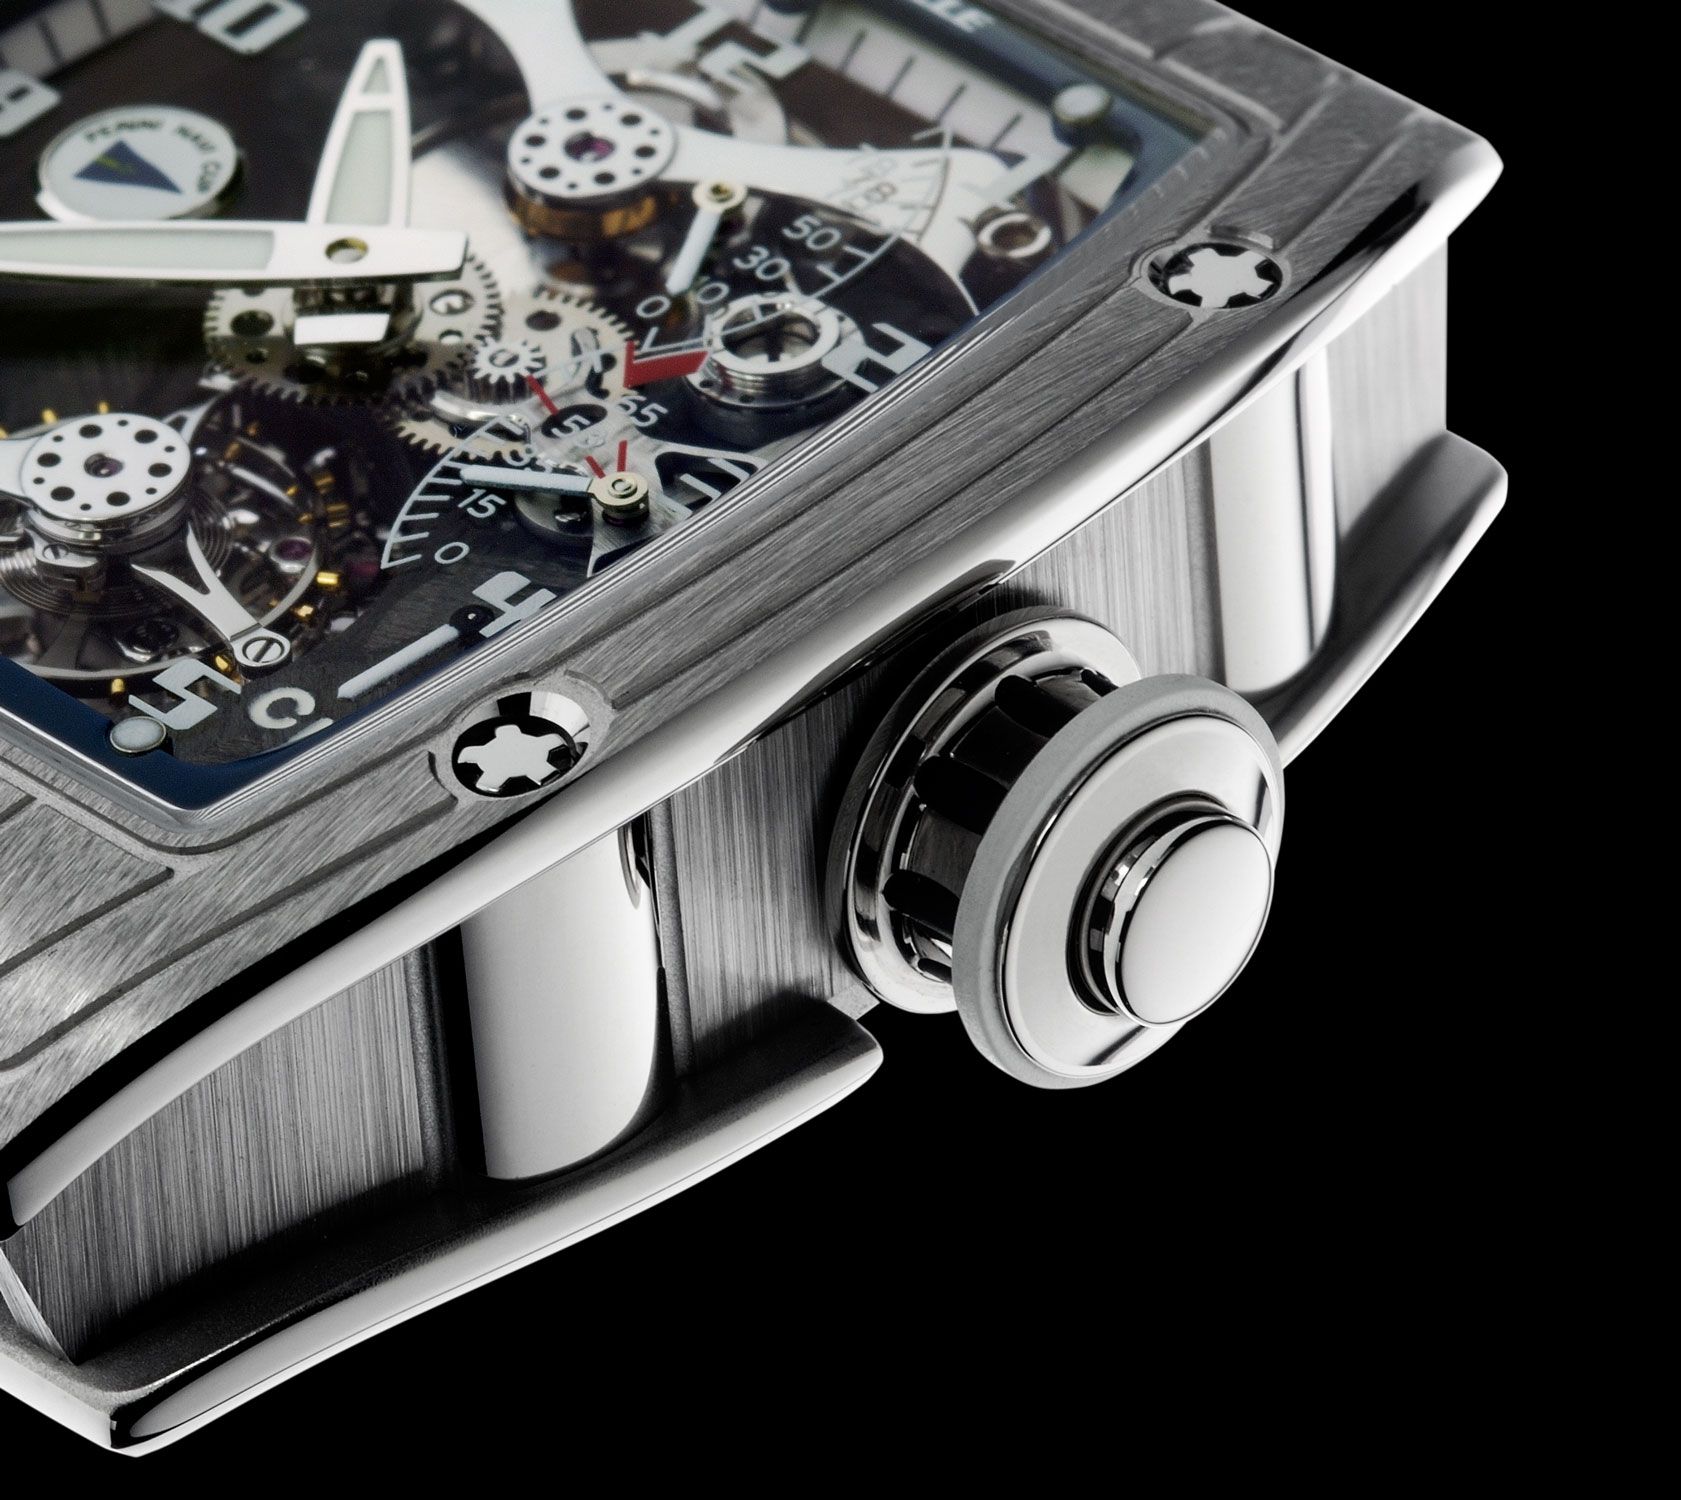 Richard Mille RM 67-02 High JumpRichard Mille RM 67-02 Alexis Pinturault Edition Extra Thin